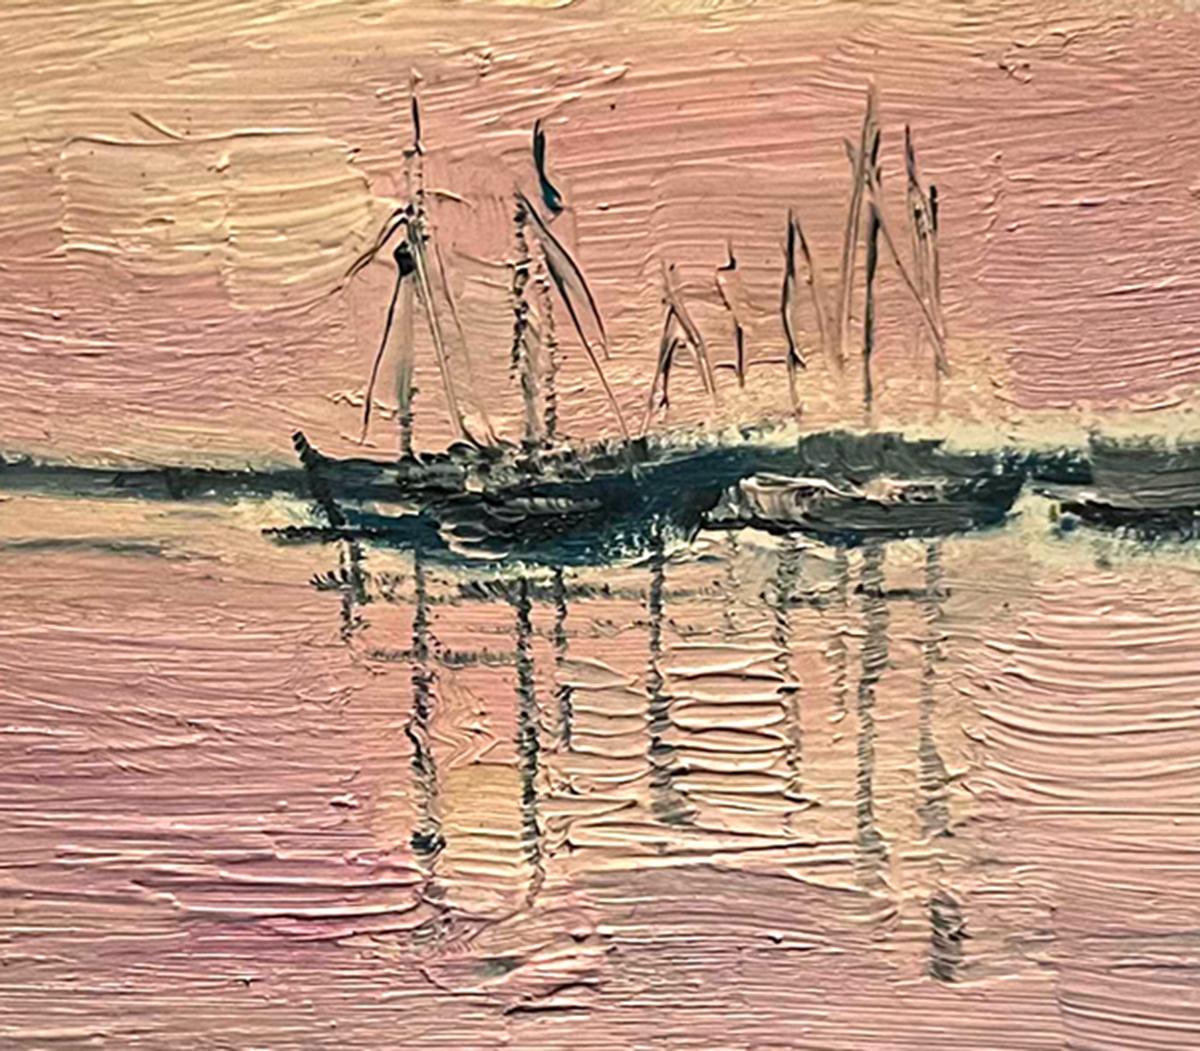 Brixham Boats is an Original Painting by Eleanor Woolley. This Painting is inspired by pictures a friend sent home from their travels. On the quiet sea some boats lie at anchor in Brixham. The sky is pink from the recently setting sun, reflecting in